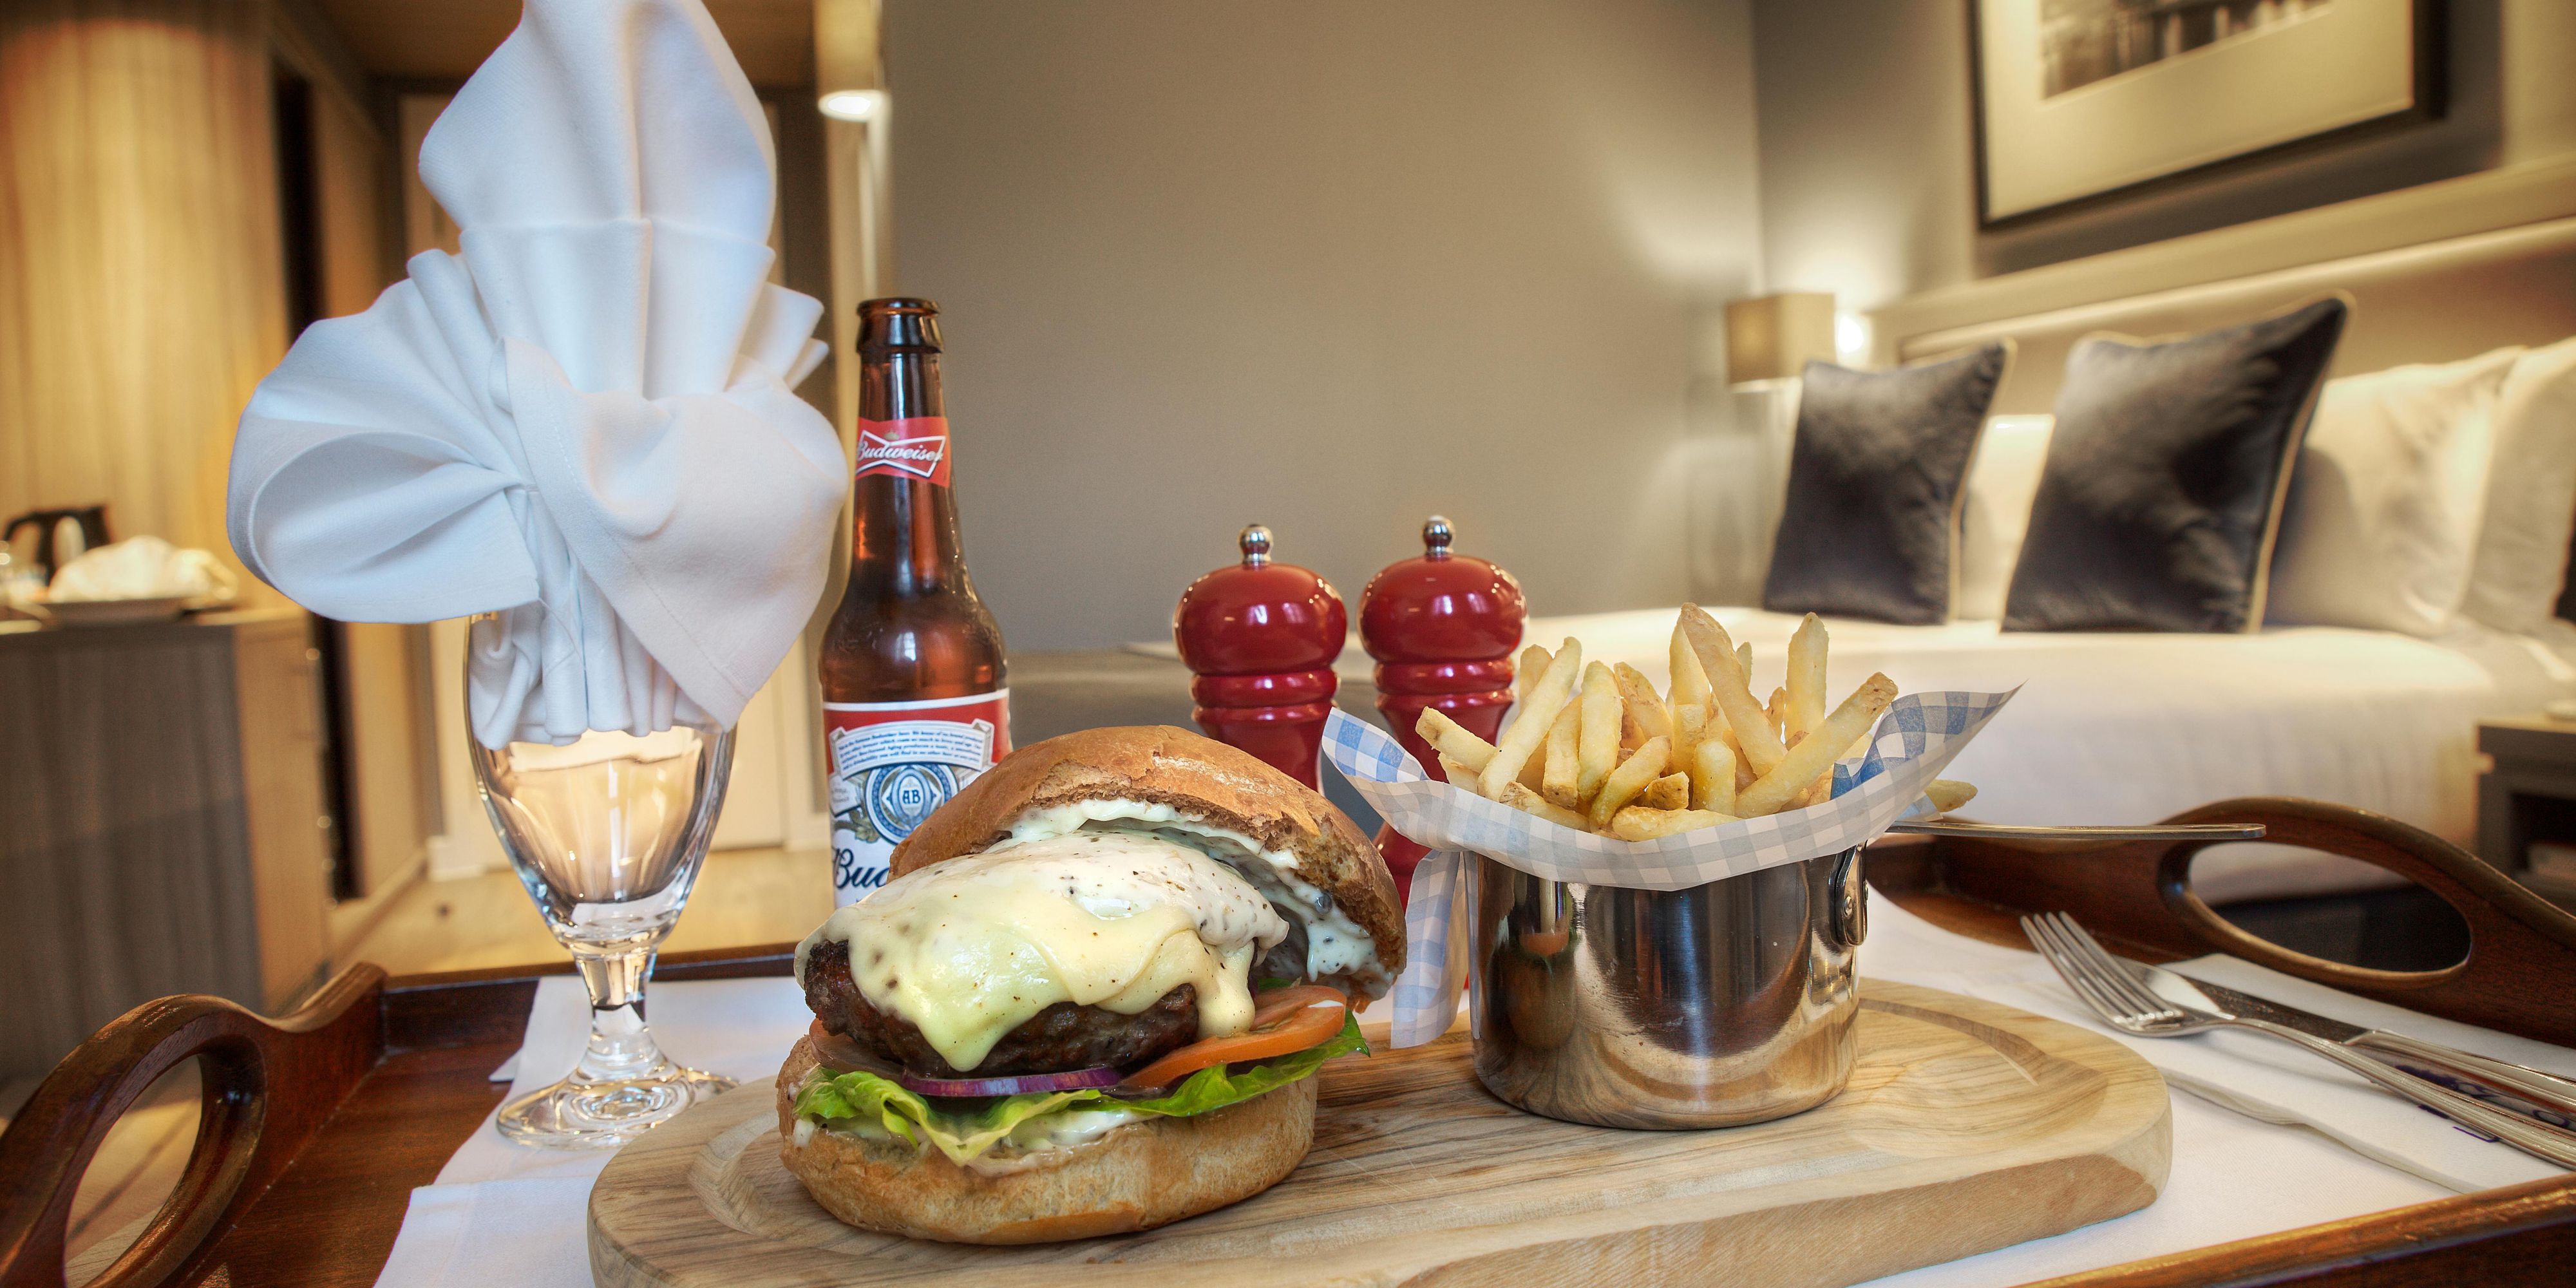 Dinner in bed? We've got you covered with our room service menu